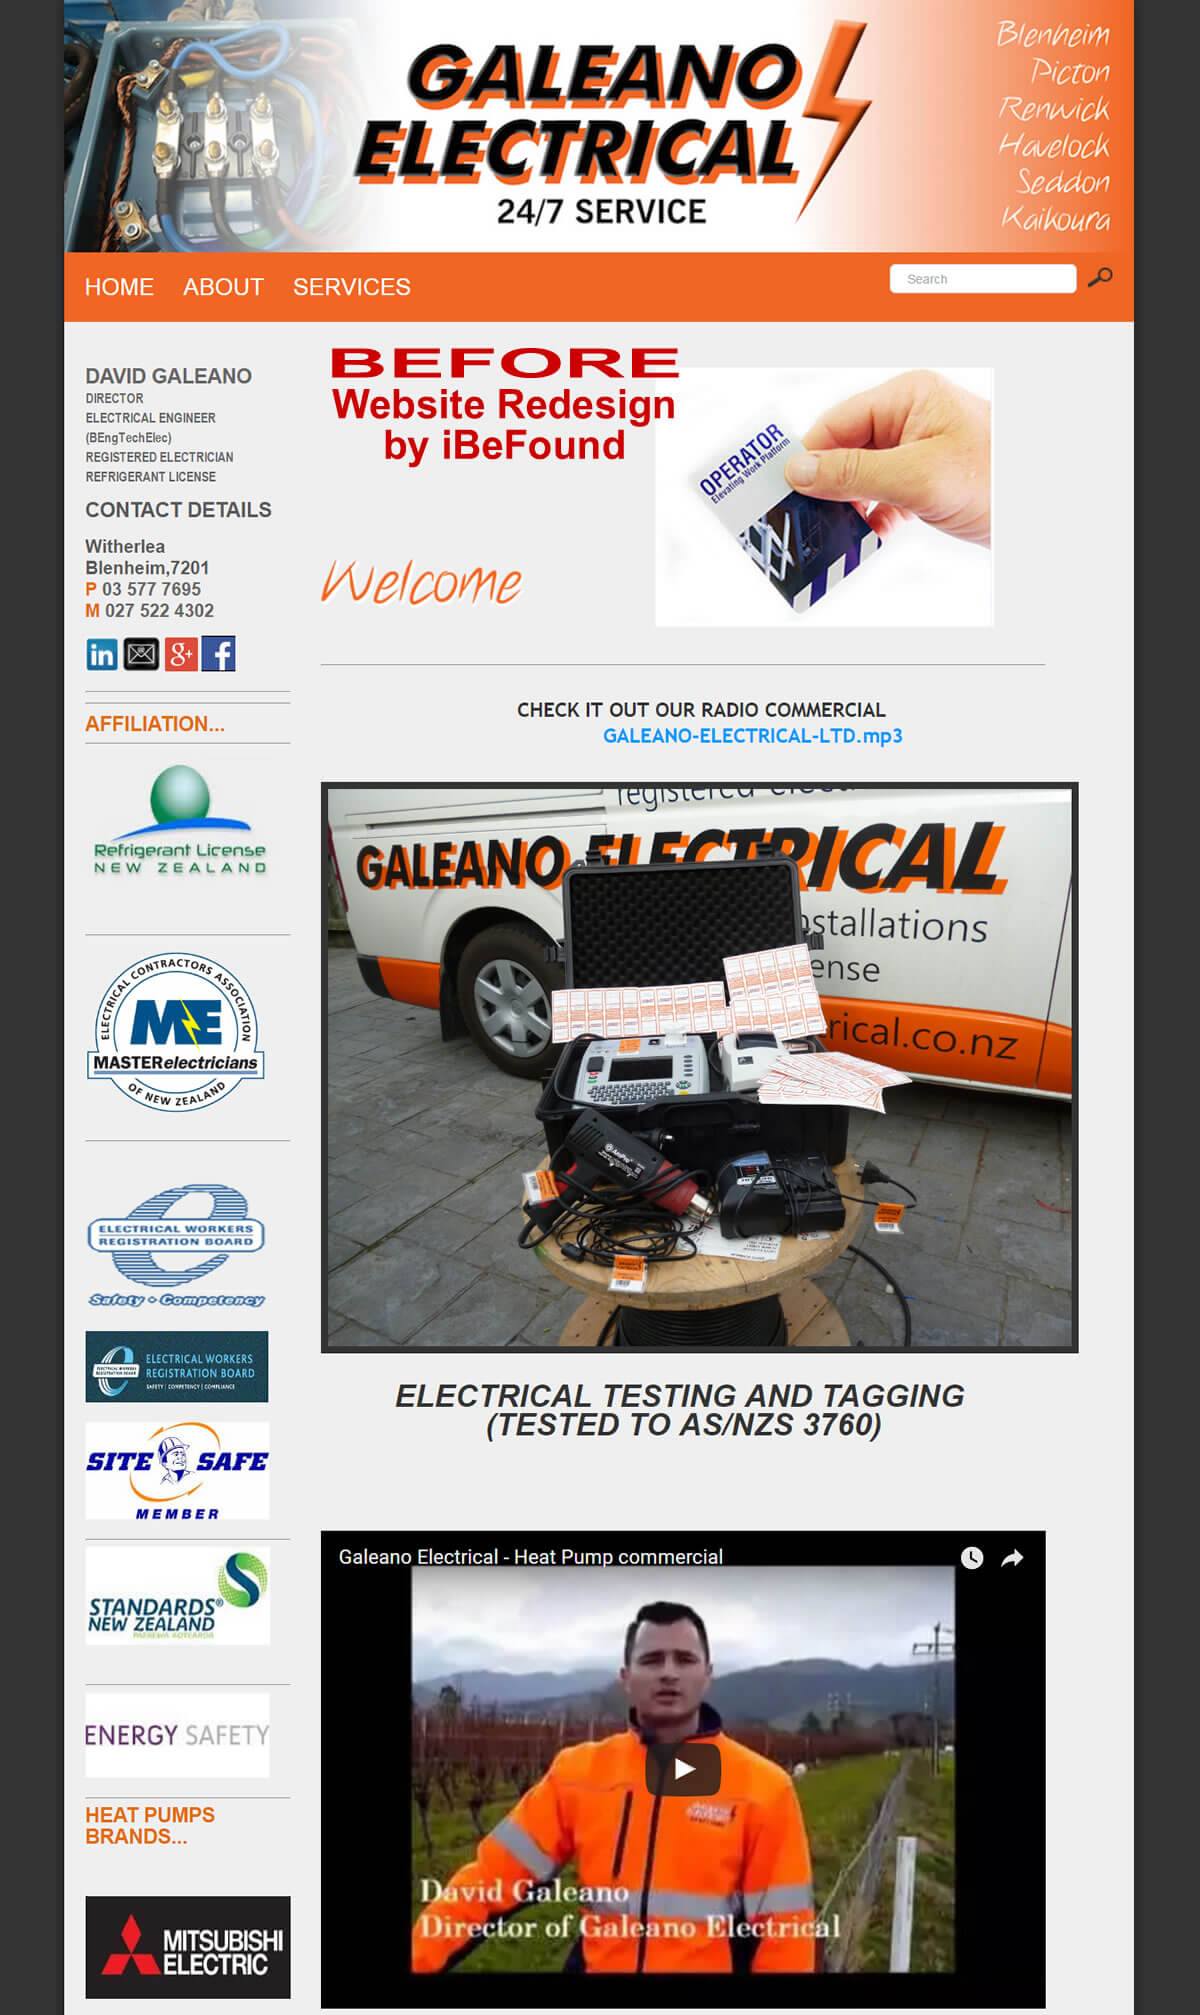 Homepage Of Galeano Electrical Before Website Redesign By Ibefound